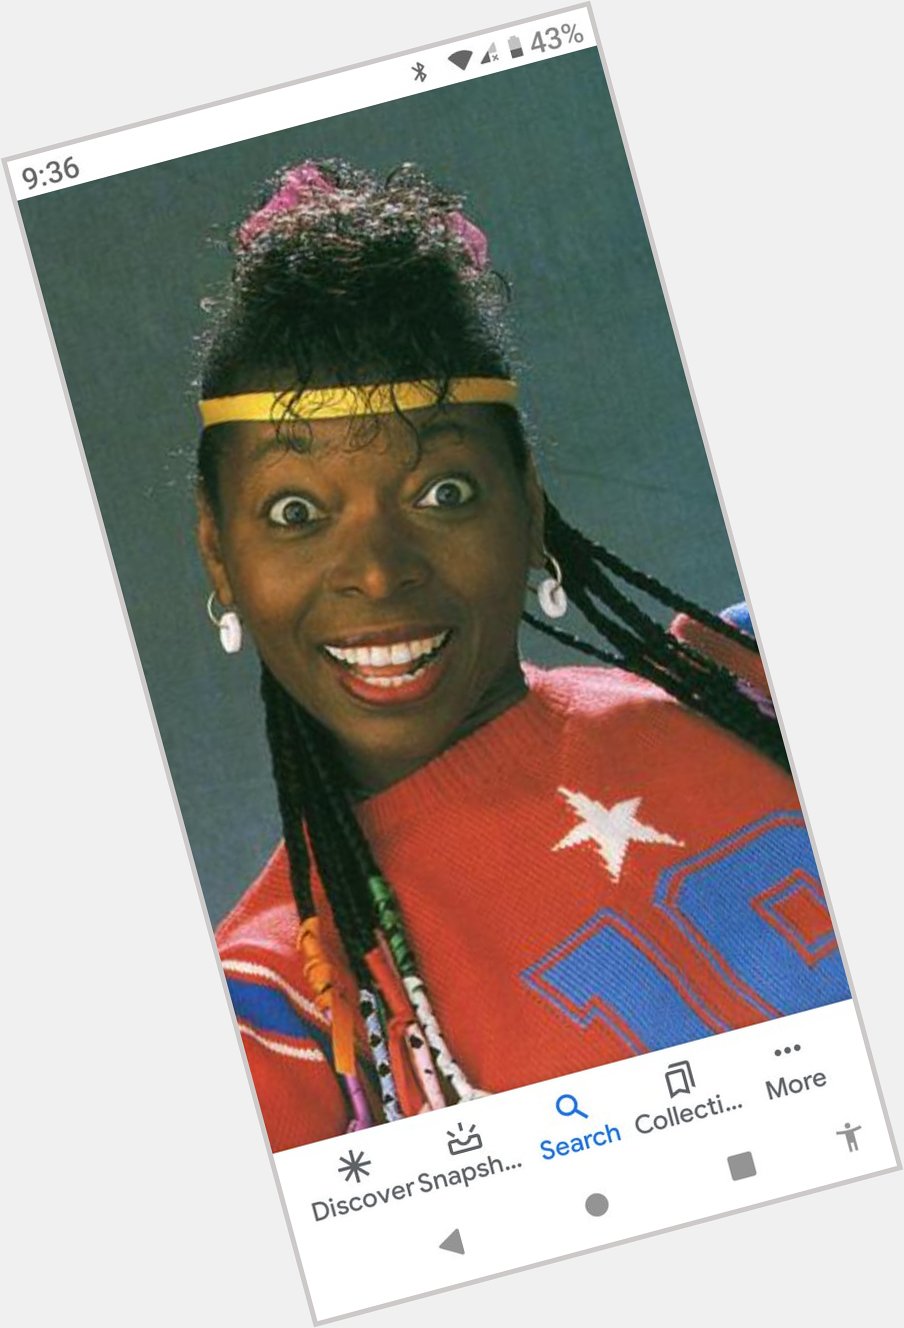 Whenever I think of Floella Benjamin, it always reminds me of her polo earings.
Happy birthday Floella  